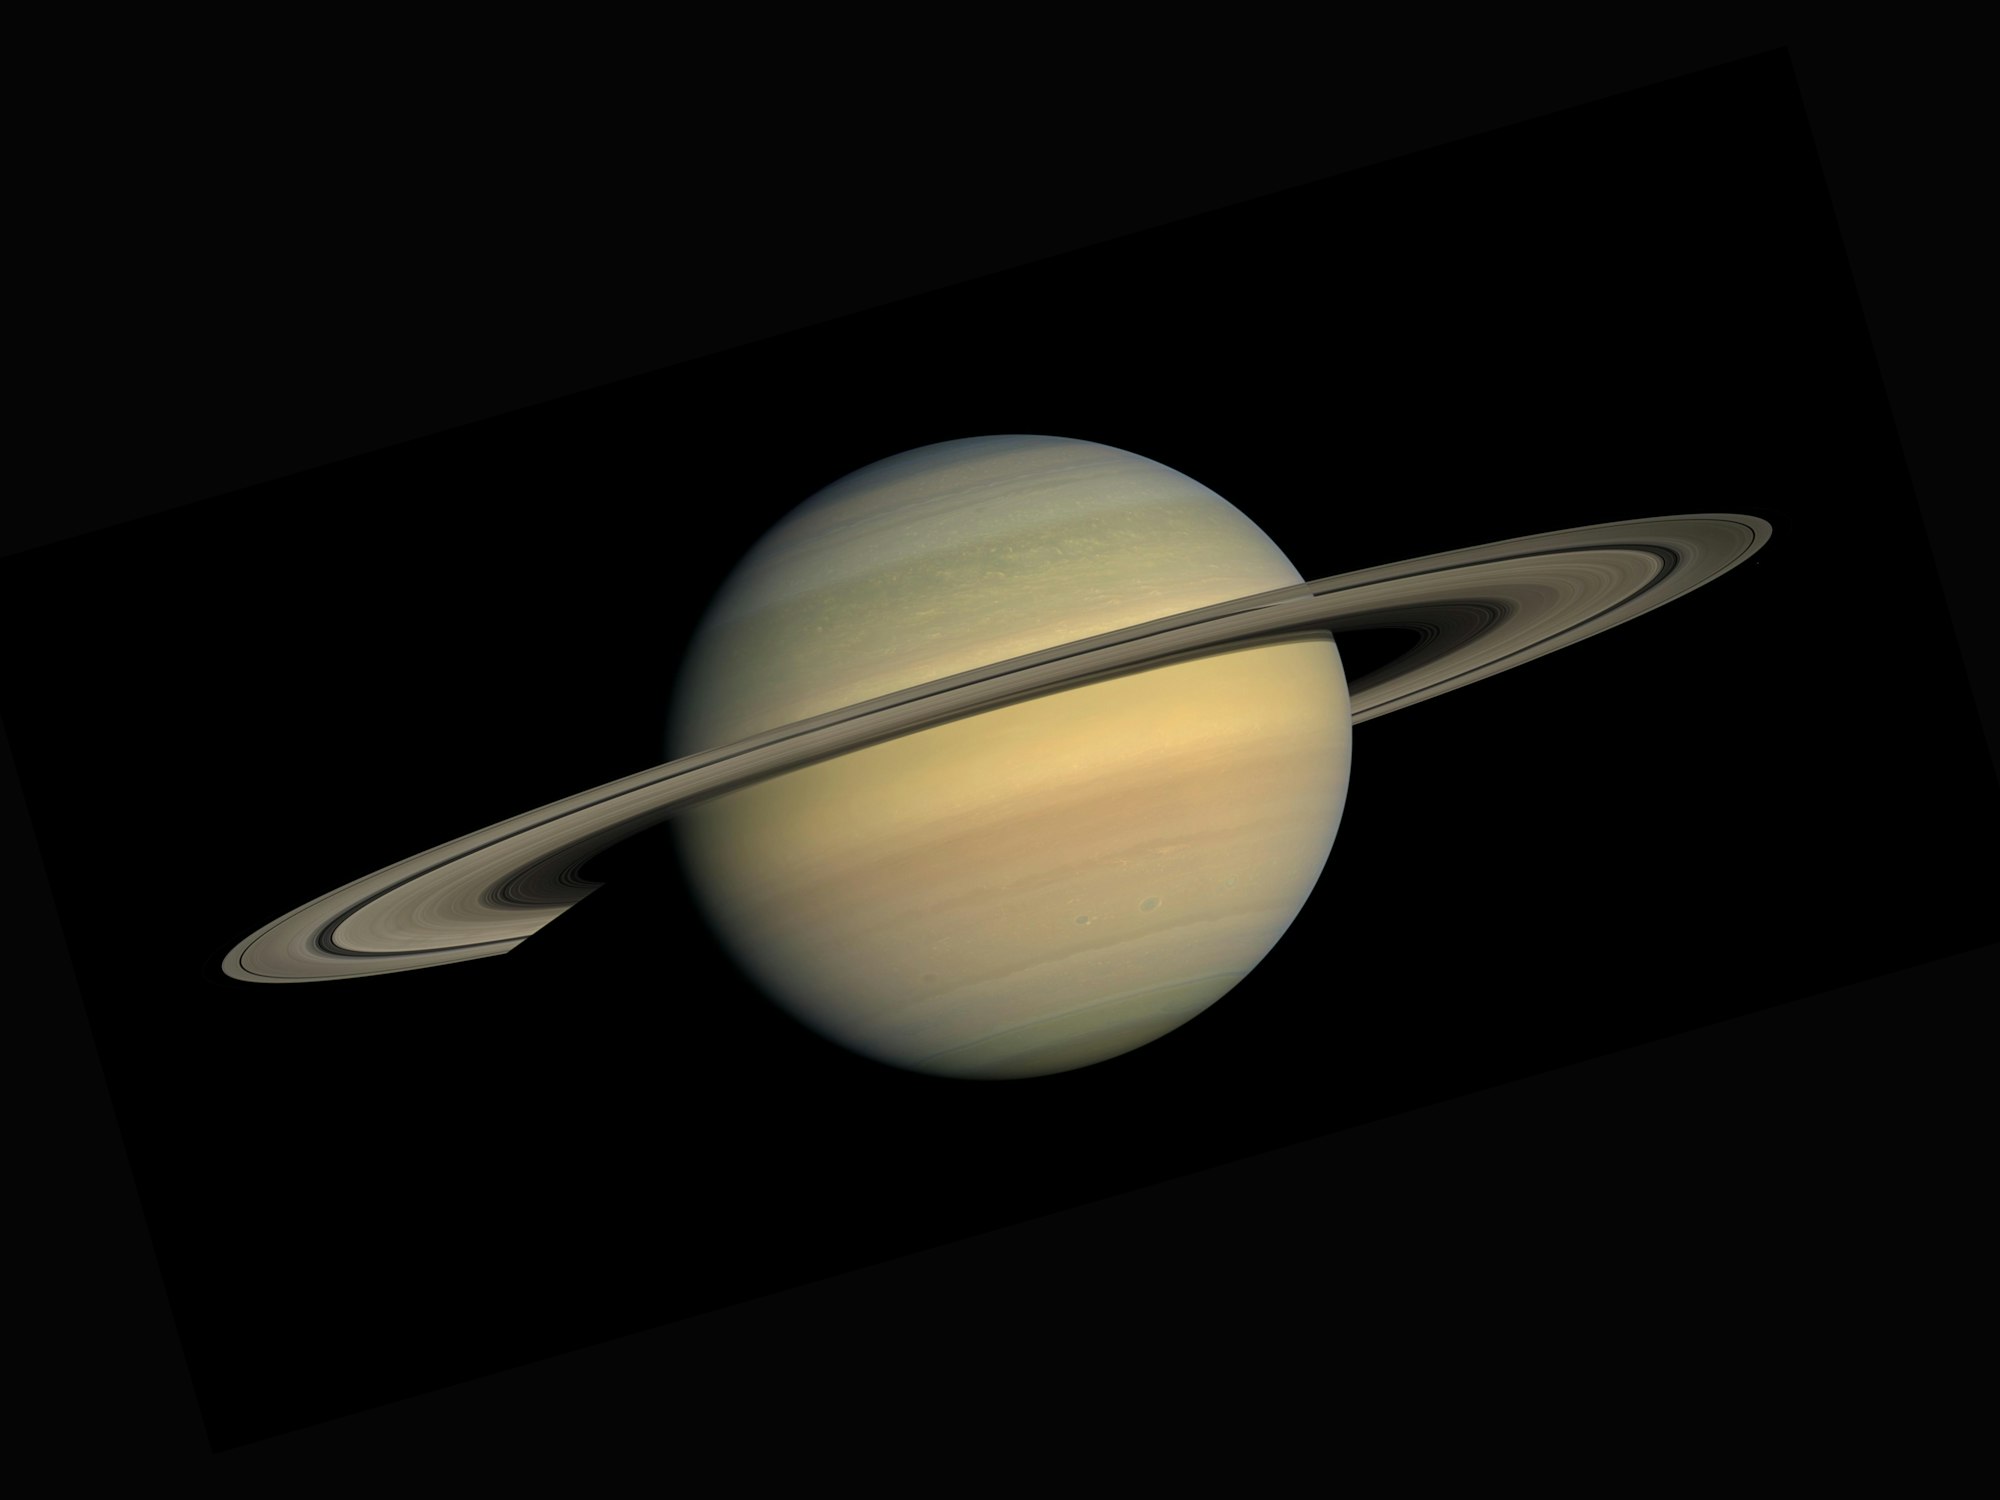 Saturn as seen from the Cassini–Huygens space-research mission - wornbee.com